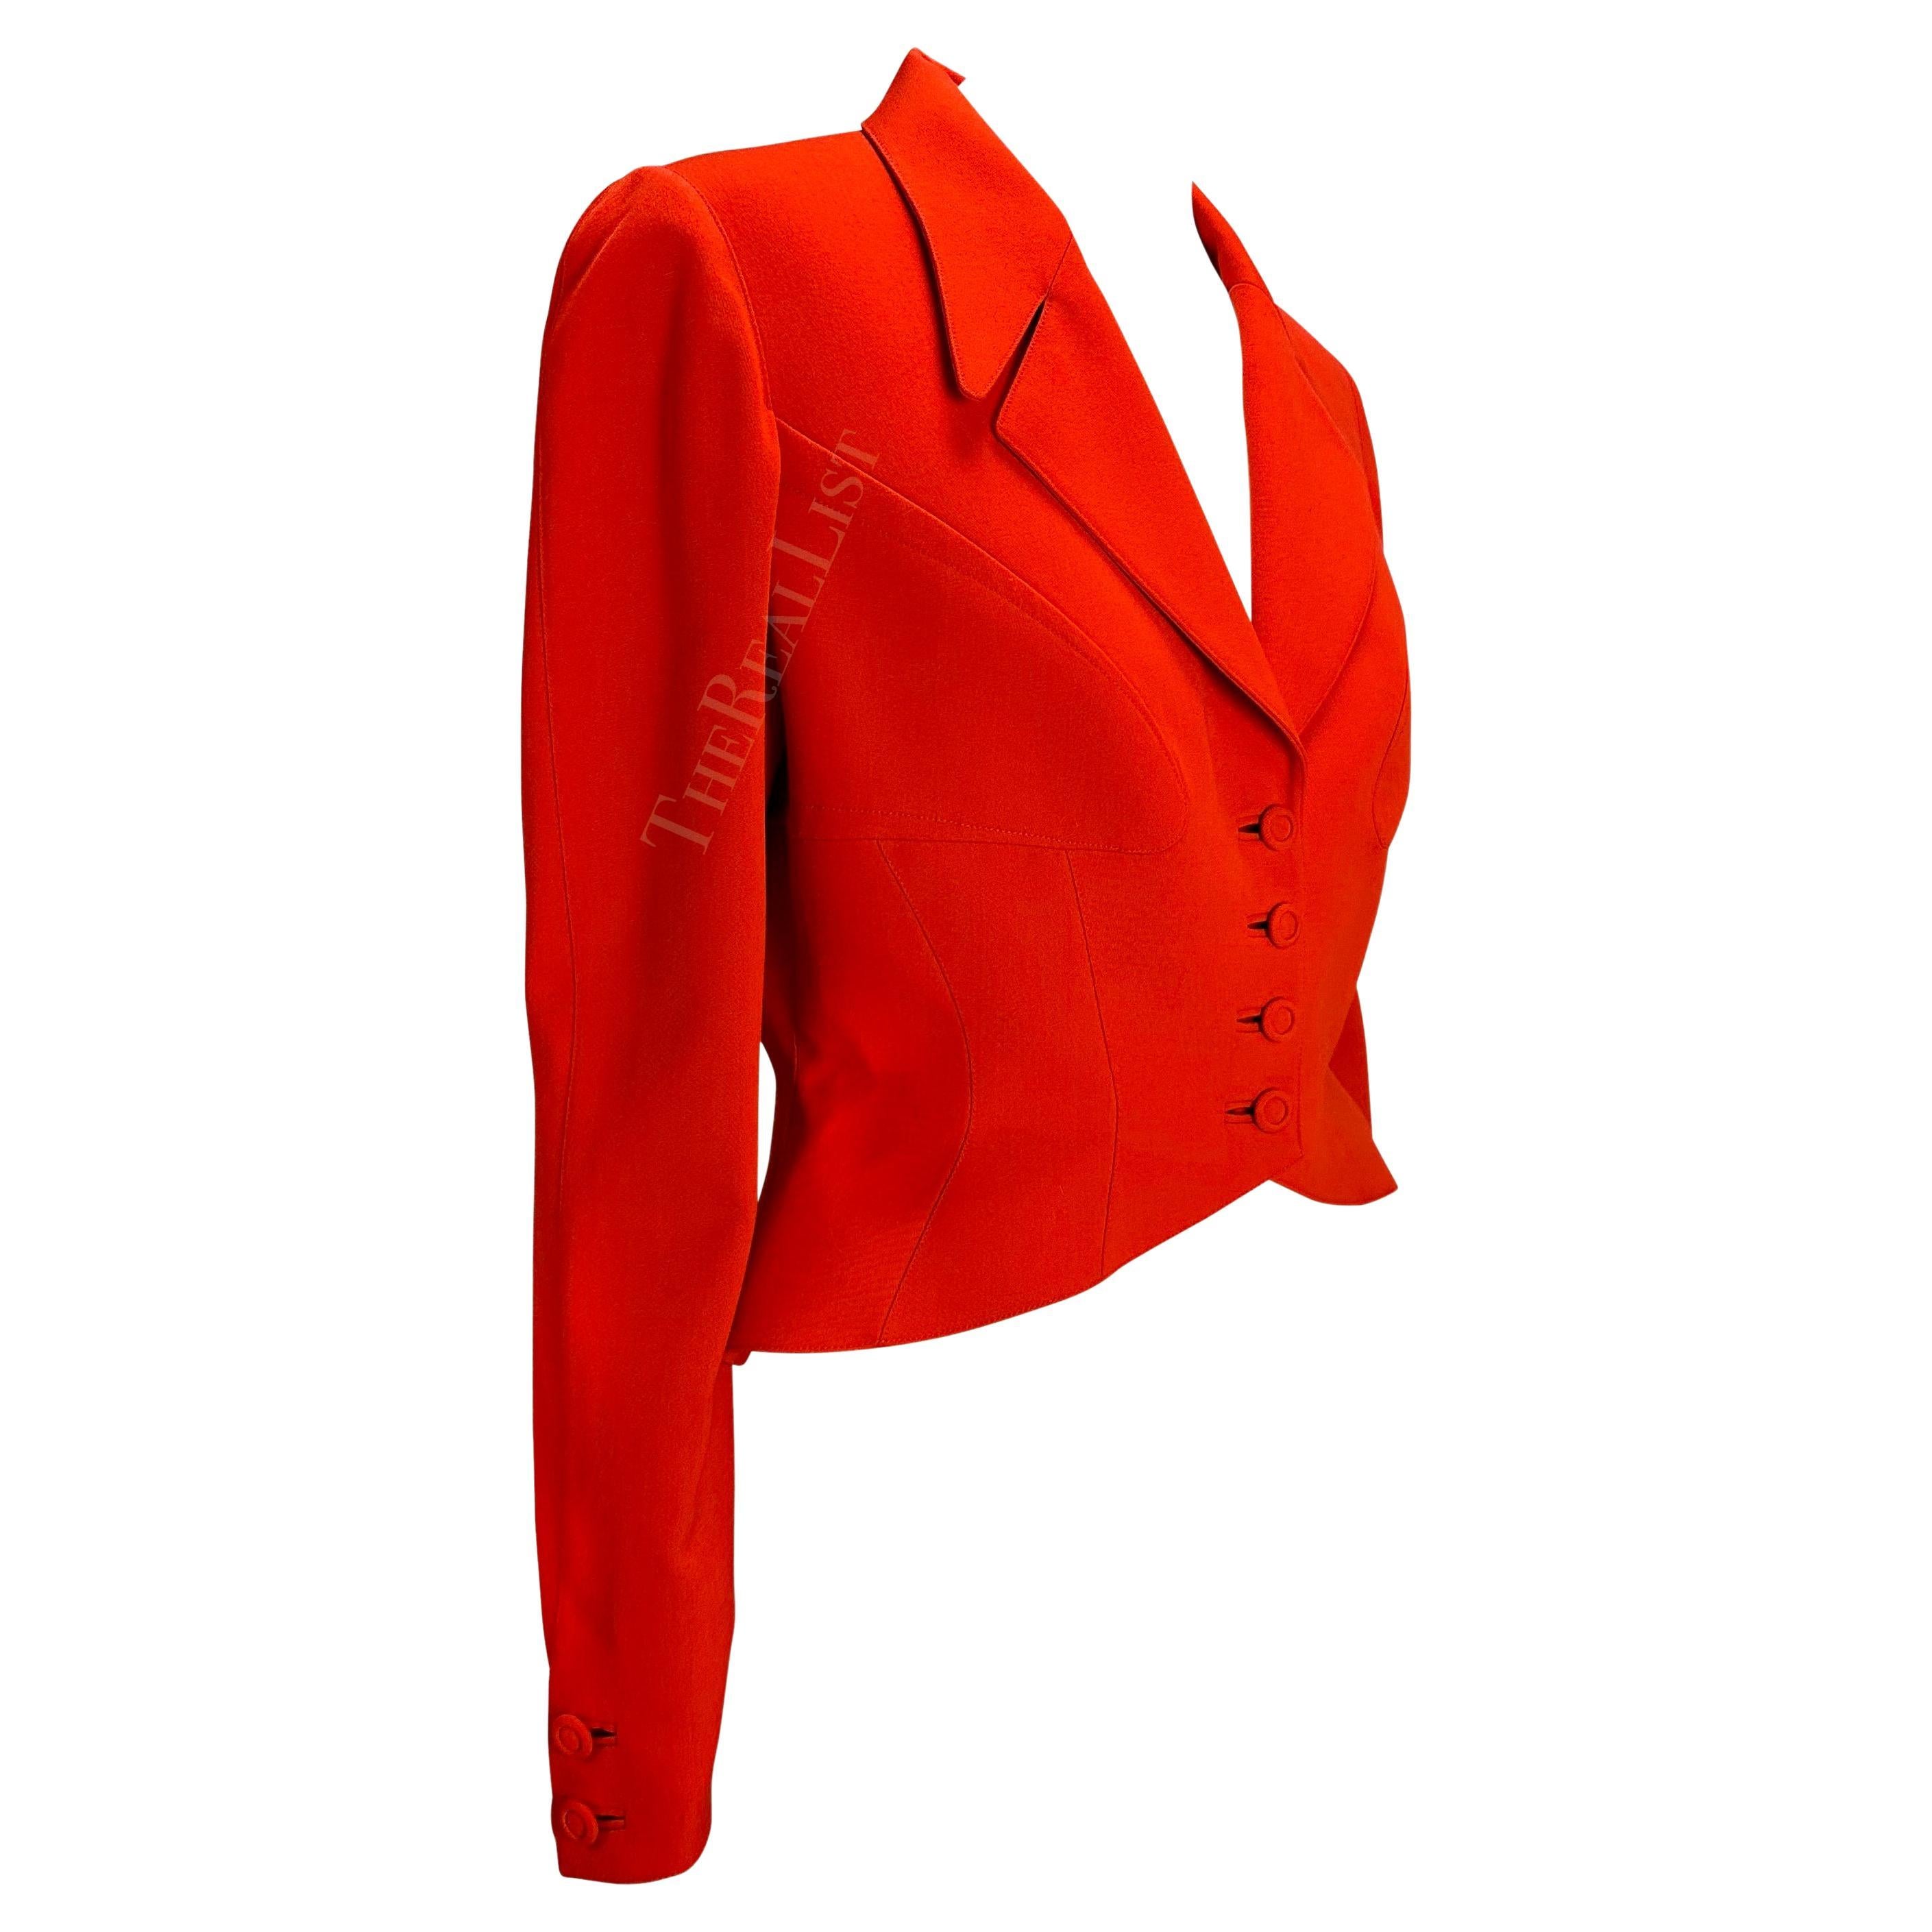 1990s Thierry Mugler Orange Structured Hourglass Cropped Blazer In Excellent Condition For Sale In West Hollywood, CA